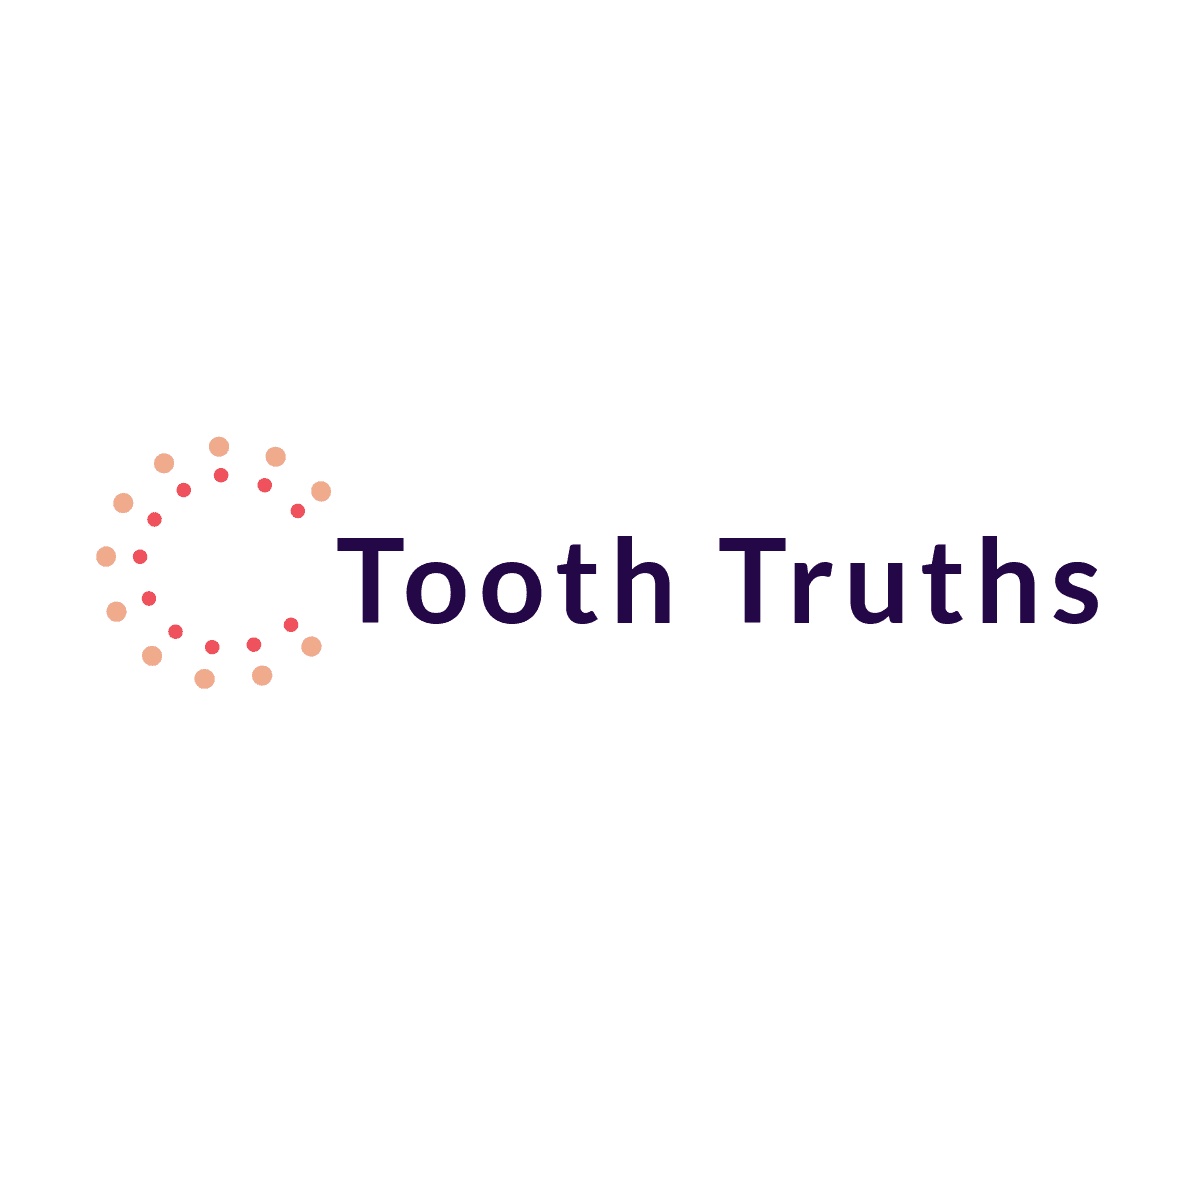 Tooth Truths